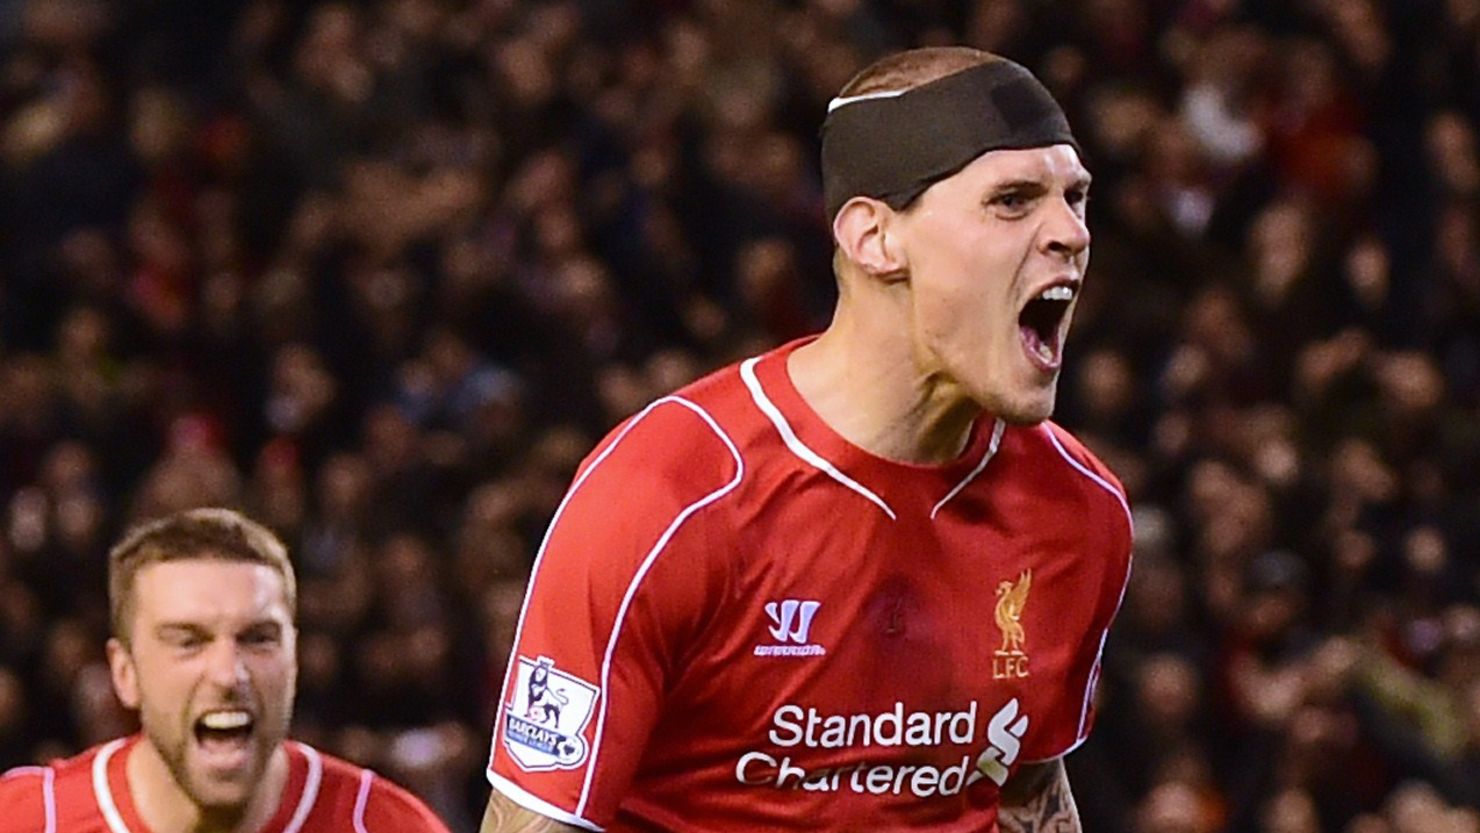 Martin Skrtel celebrates his dramatic late equalizer for Liverpool against Arsenal at Anfield.